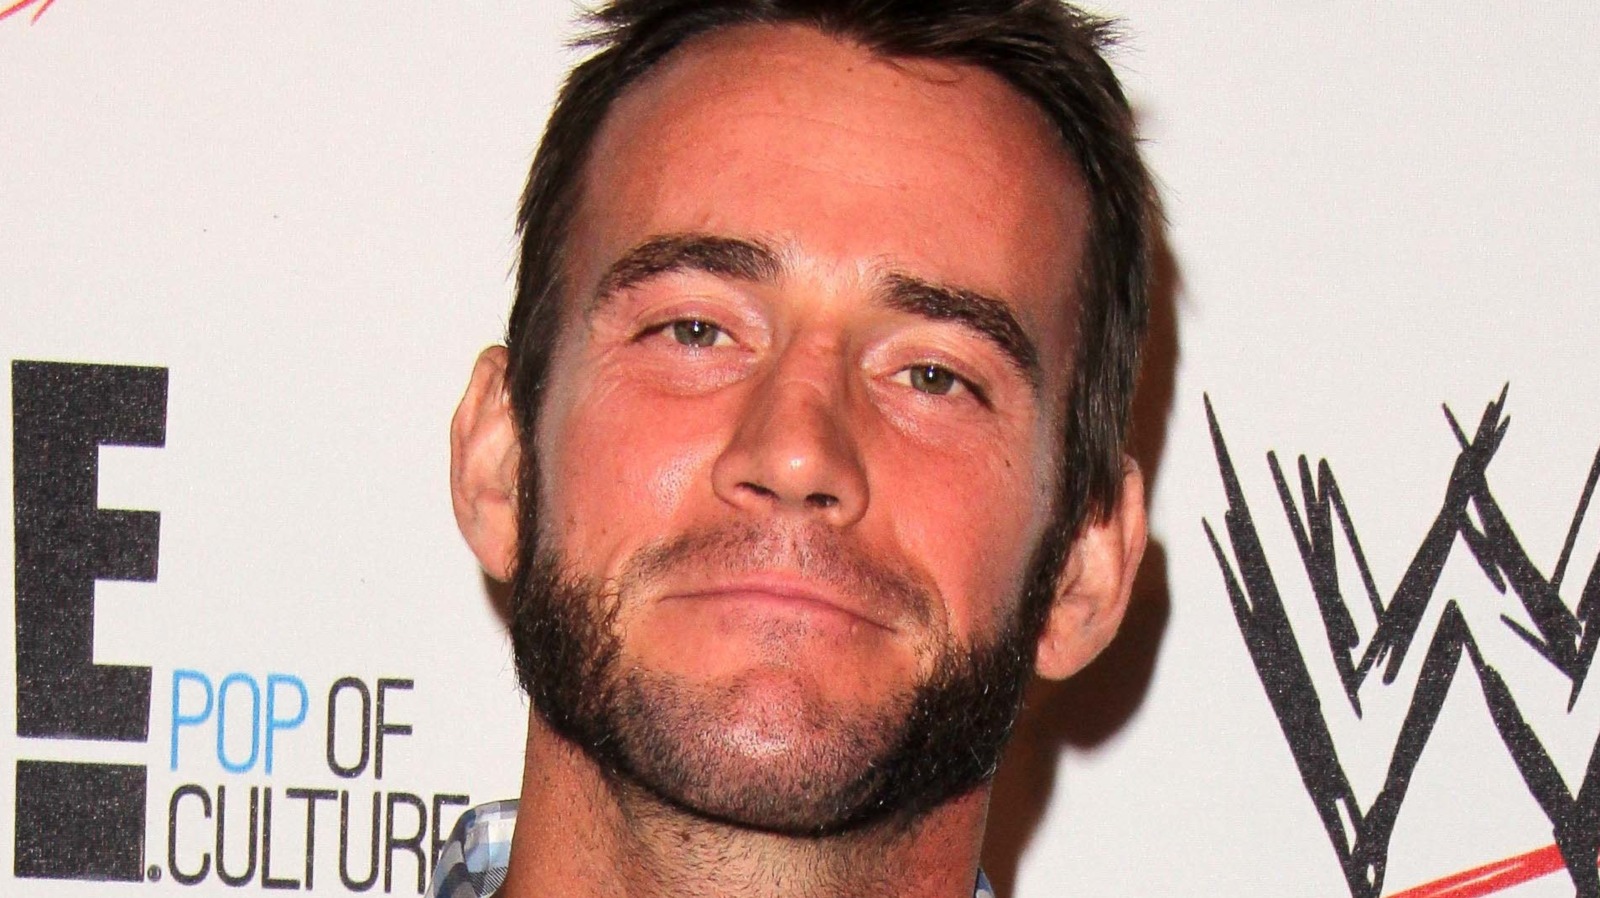 What is CM Punk's Net Worth as of 2023?